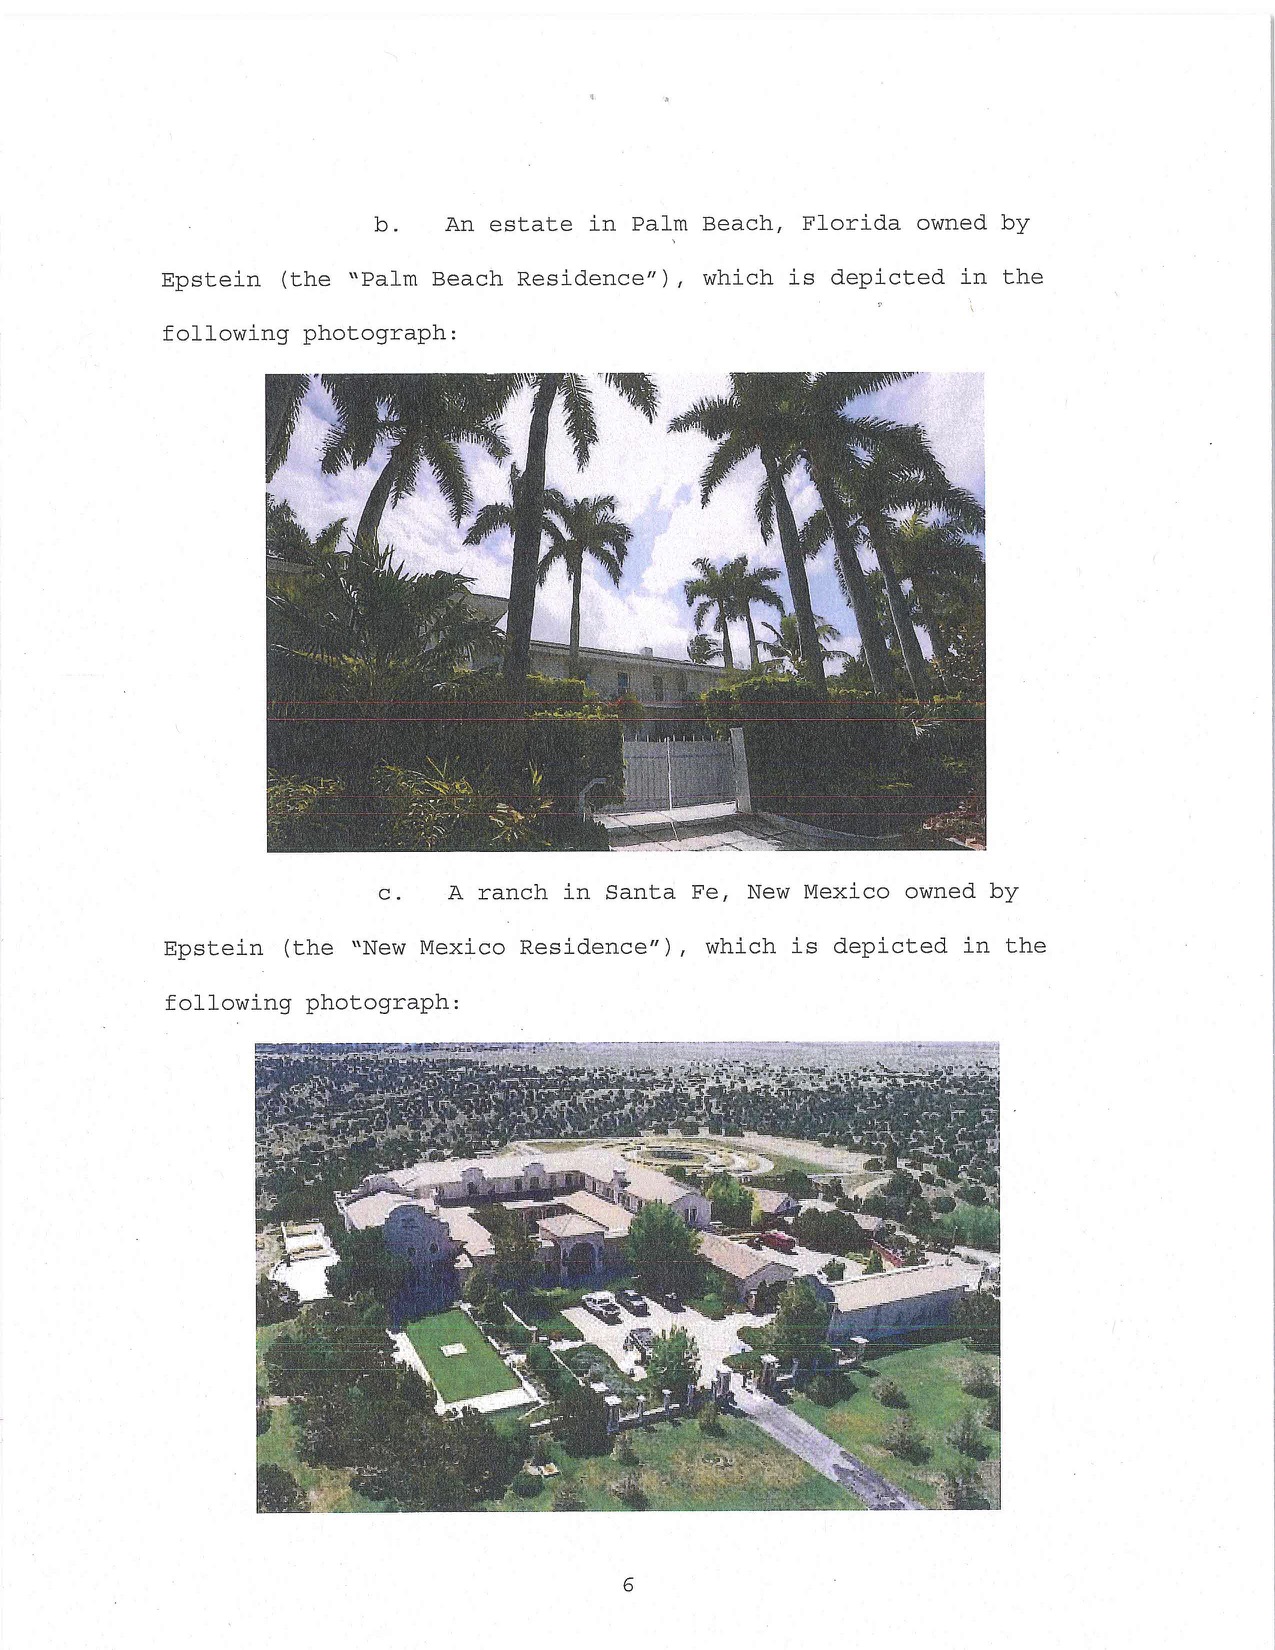 The United States vs Ghislaine Maxwell -  An estate in Palech, Merida owed by Epstein iton Pain Teach Rendance